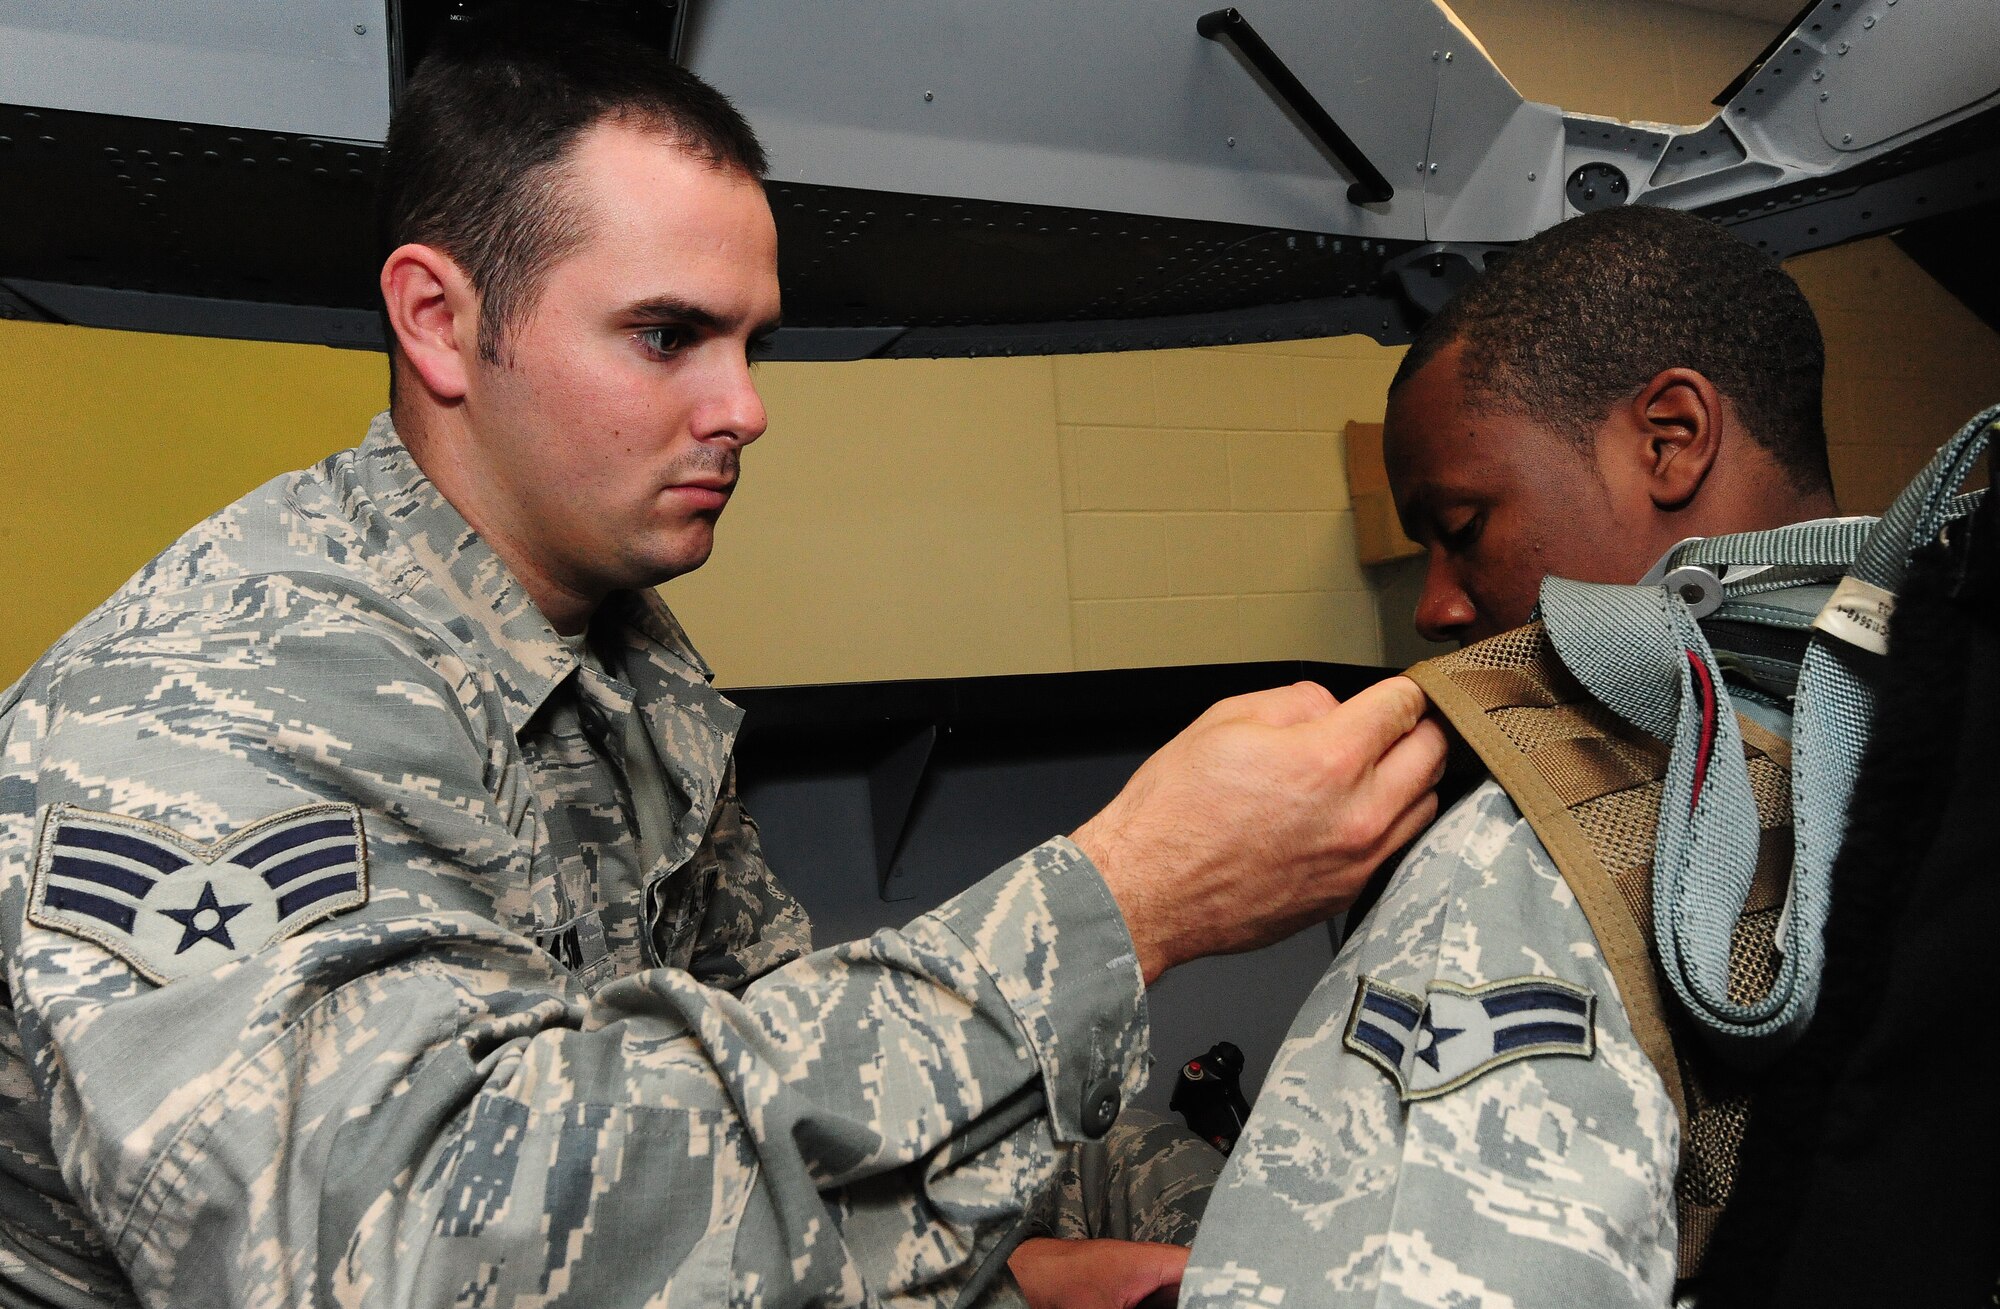 Senior Airman Ethan Mason shows fellow 509th Operations Support Squadron aircrew flight equipment technician Airman 1st Class Dalvin Washington how to attach a night vision device on an Airsave survival vest at Whiteman Air Force Base, Mo., July 16, 2013. This was done as part of a training scenario with the first wave of Airsave technicians, who were equipped to then train other OSS members. (U.S. Air Force photo by Staff Sgt. Nick Wilson/Released)